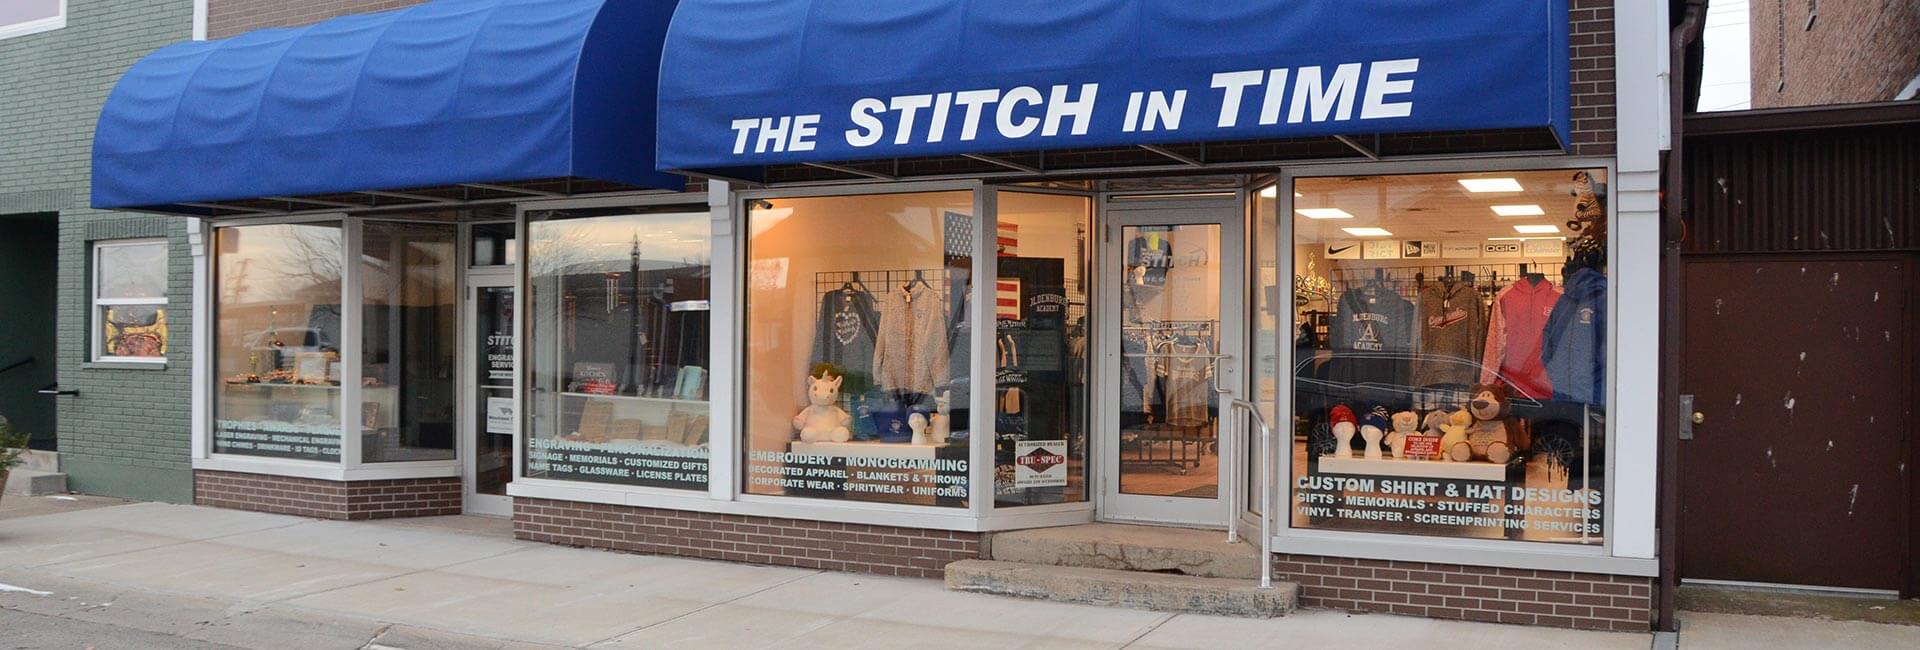 The Stitch In Time building exterior